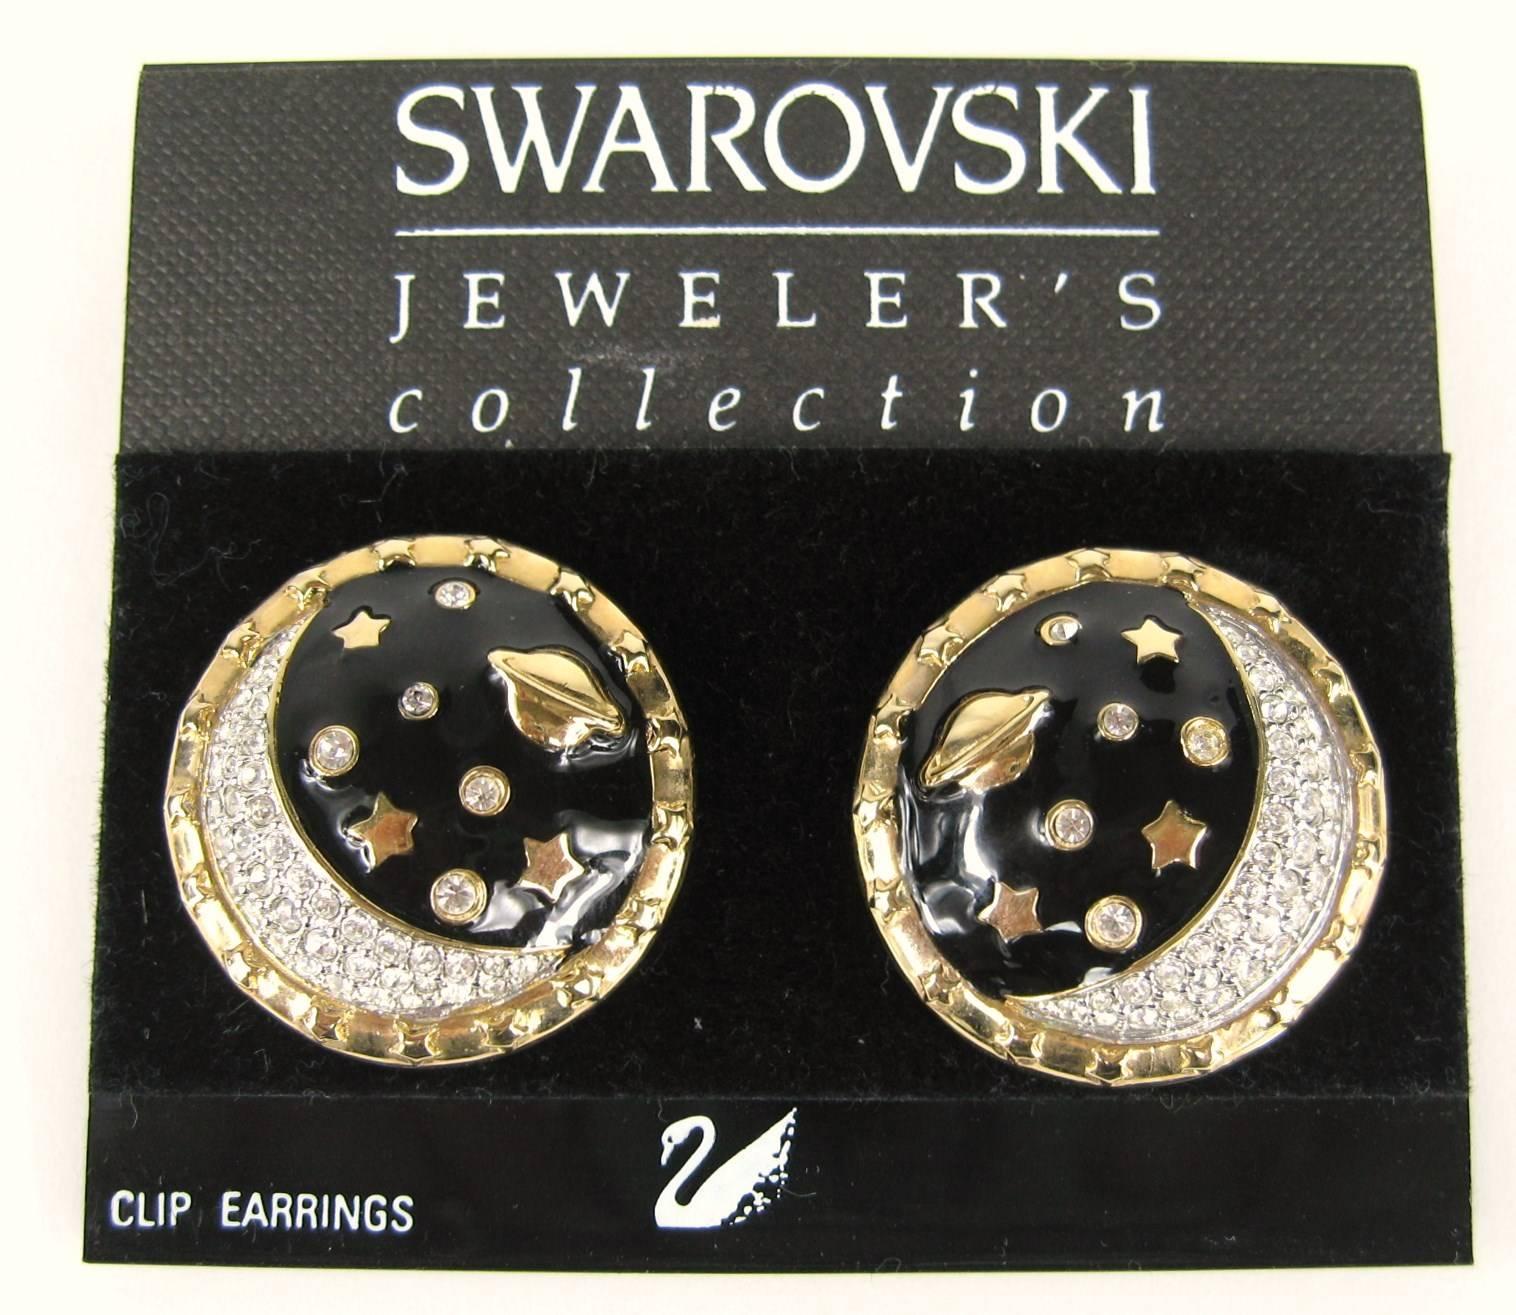 Pair of Jewelers Collections earrings from Swarovski. New old stock, Never worn. Measure 1.15 in. or 29.30 mm. These are Clip on's. This is out of a massive collection of Hopi, Zuni, Navajo, Southwestern, sterling silver, costume jewelry and fine